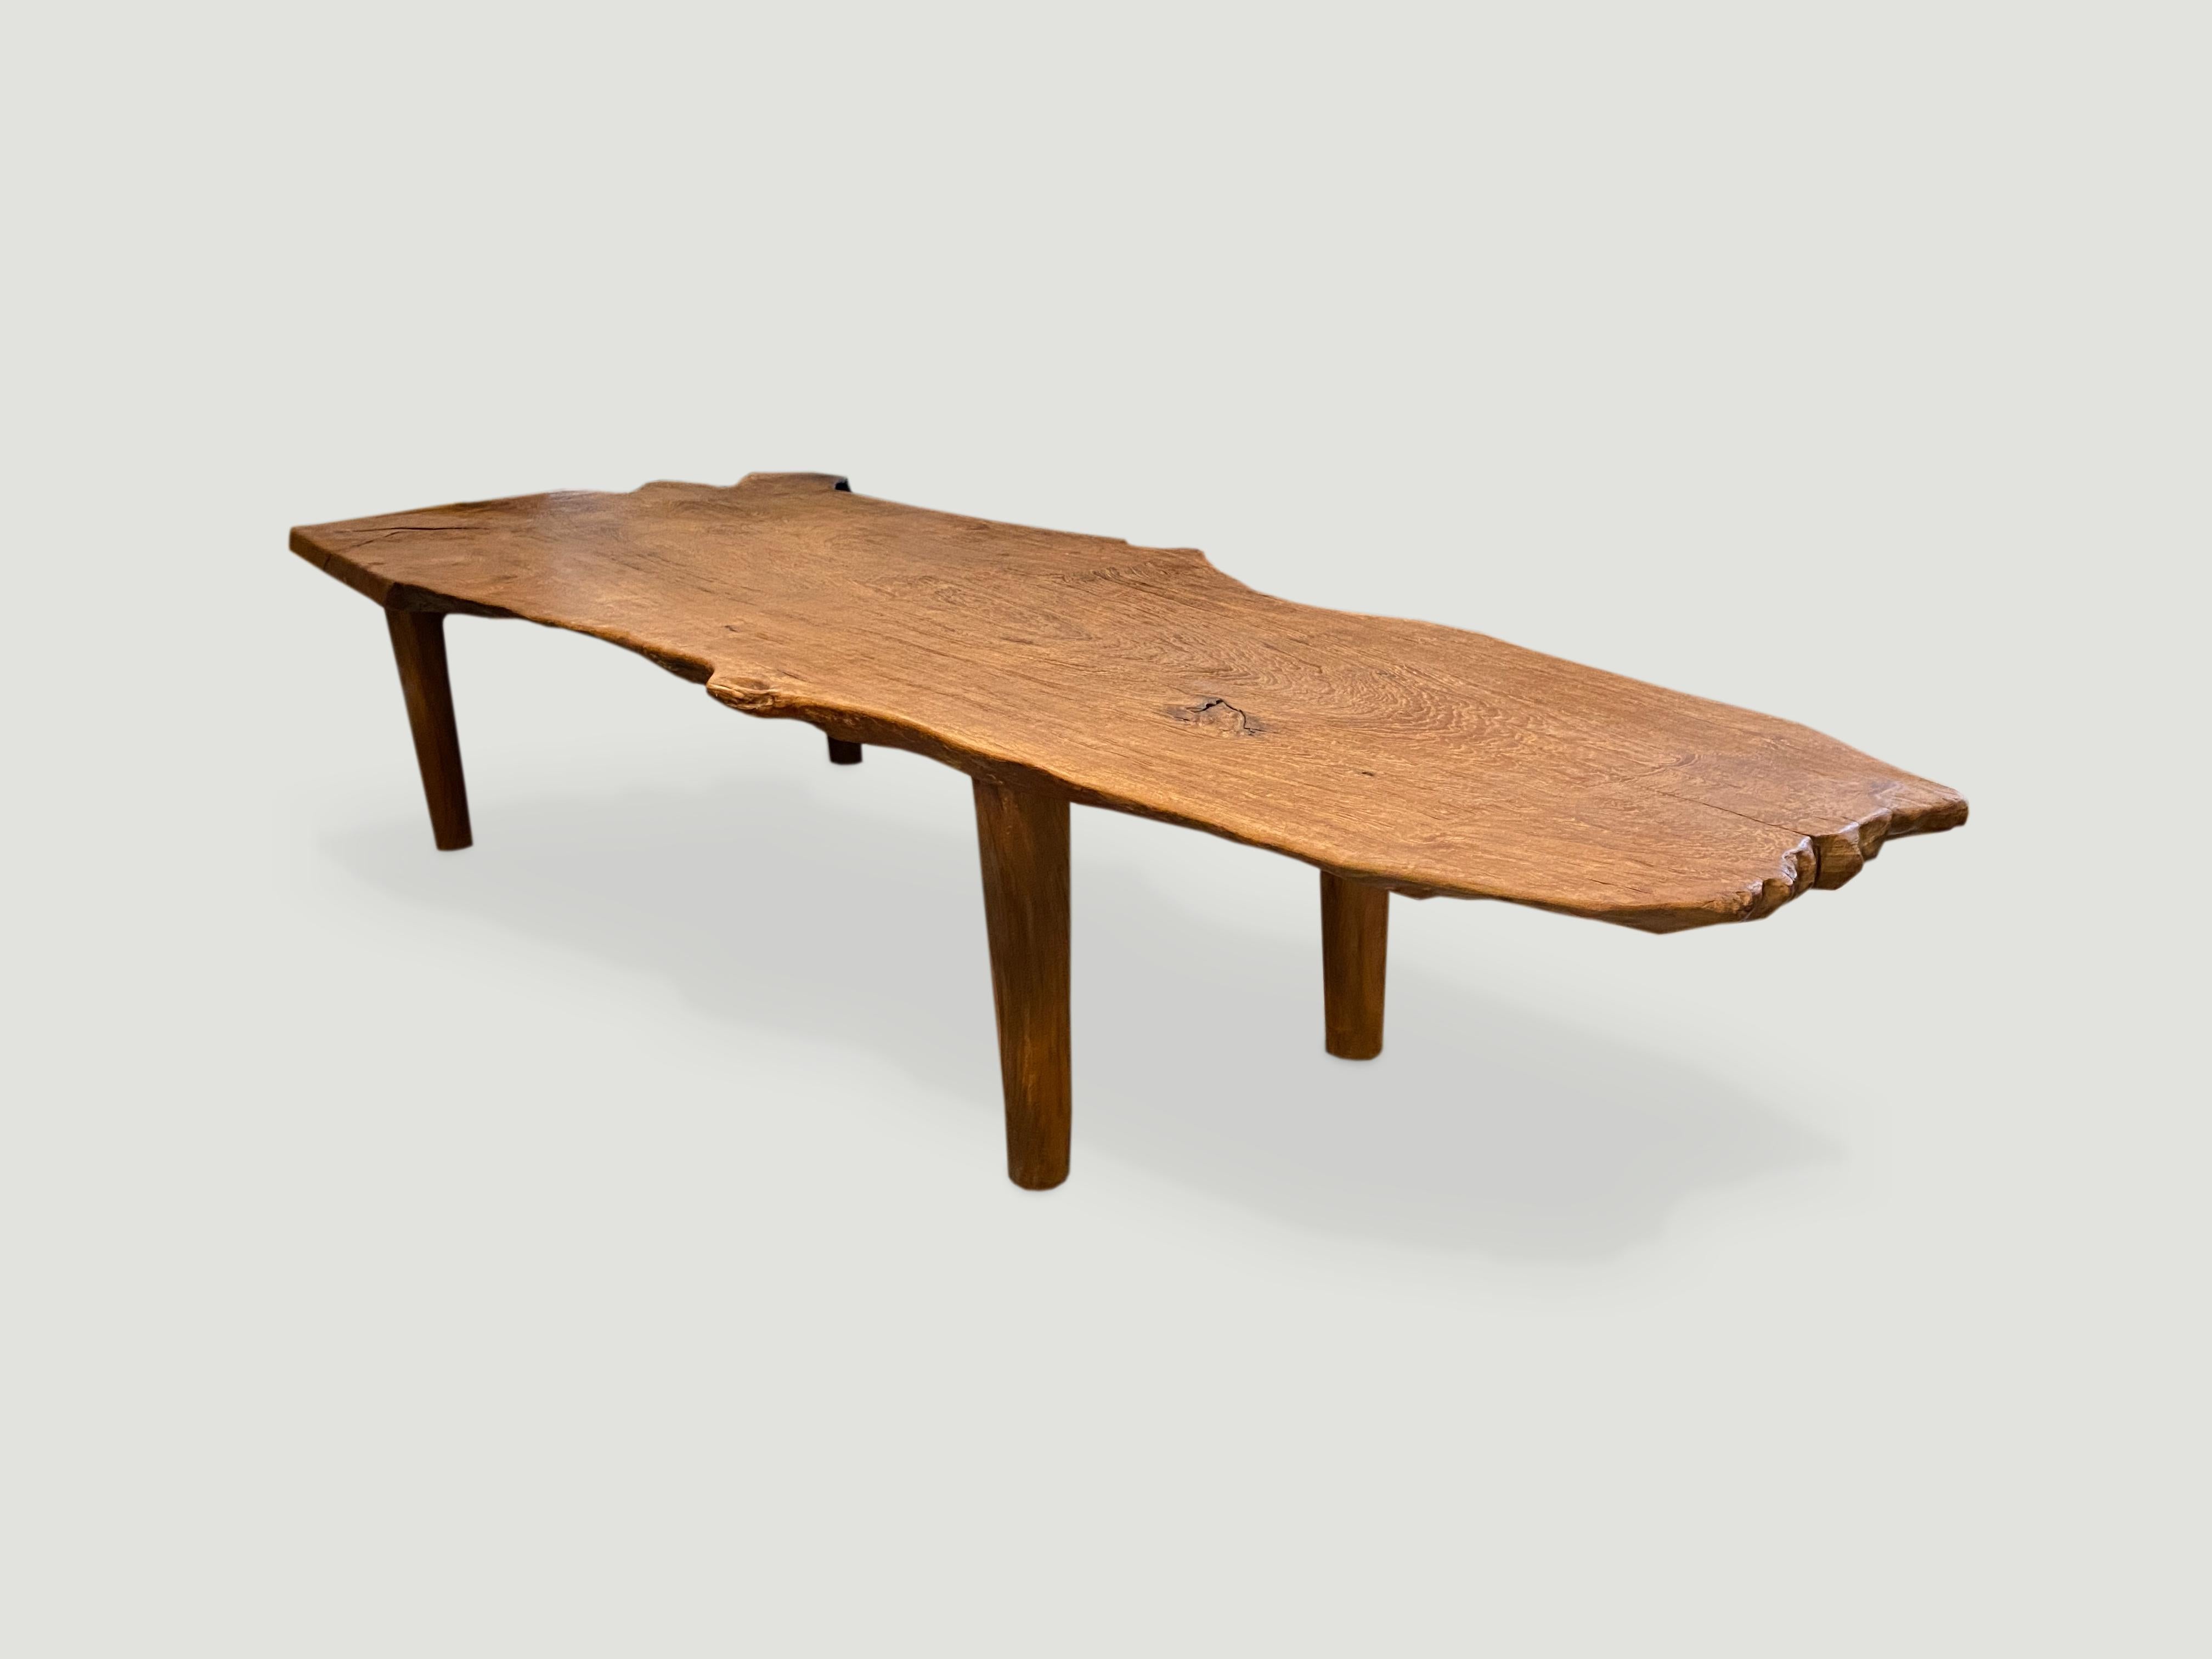 Impressive live edge reclaimed teak wood coffee table or bench. Stunning grain on this single slab. We added the midcentury style legs and can increase the height for a console or dining table. We can also charr the wood black if preferred.

This